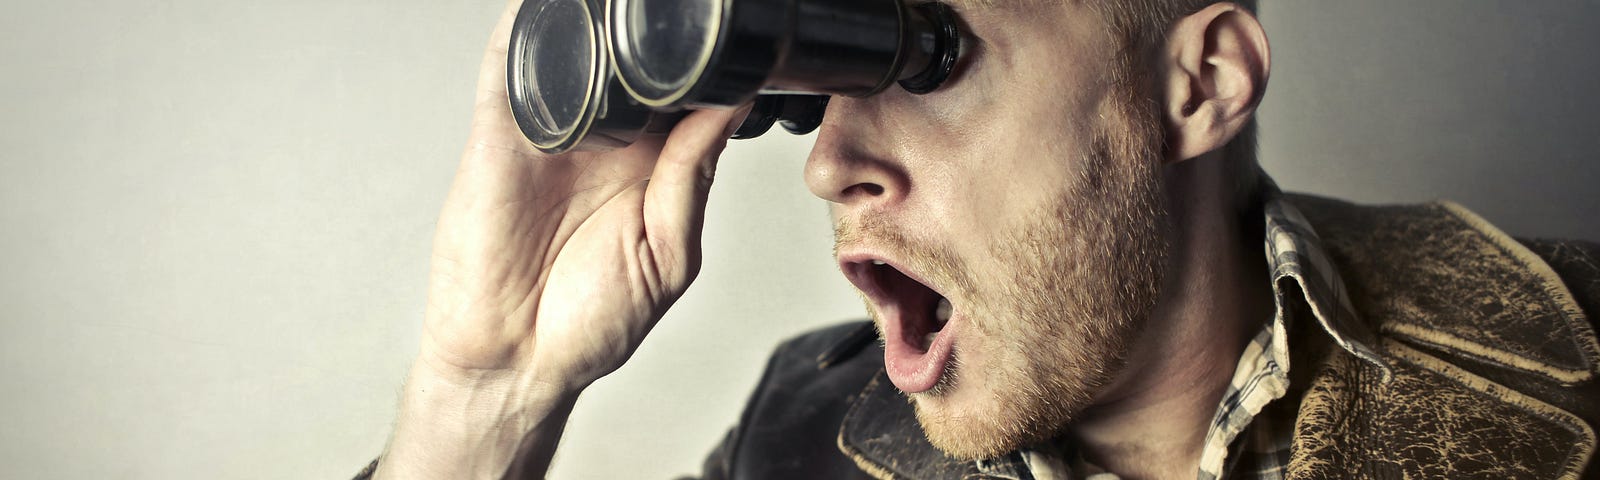 A blonde guy in his 40s wearing a leather jacket looks through binoculars and gasps